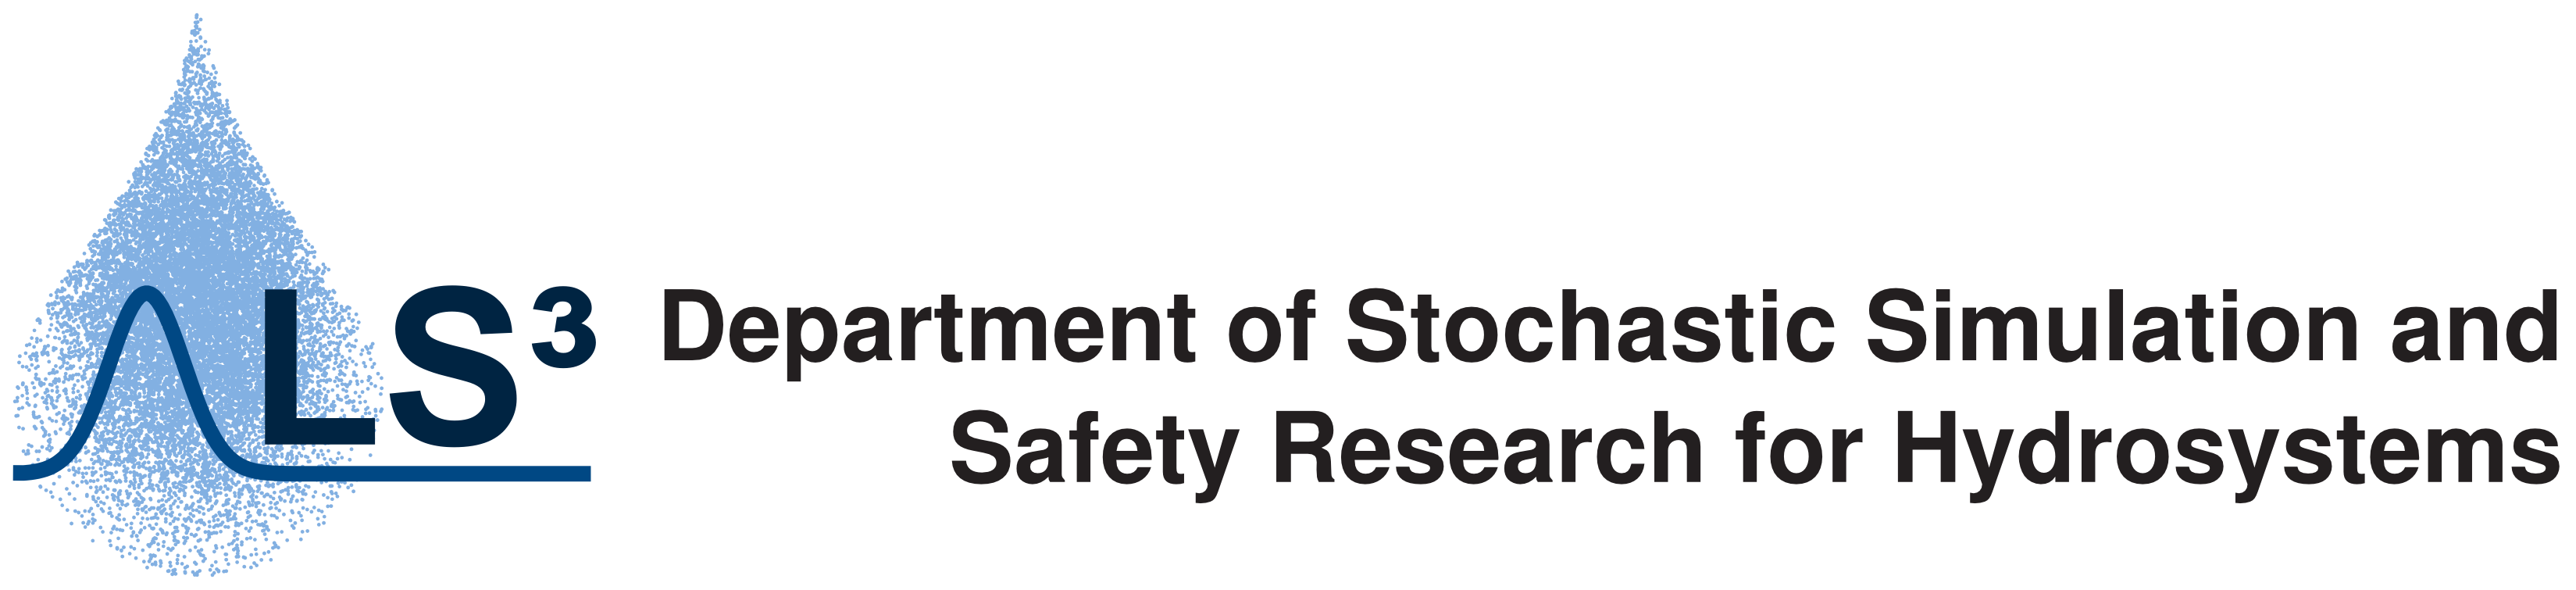 Stochastic Simulation and Safety Research for Hydrosystems (LS3) logo